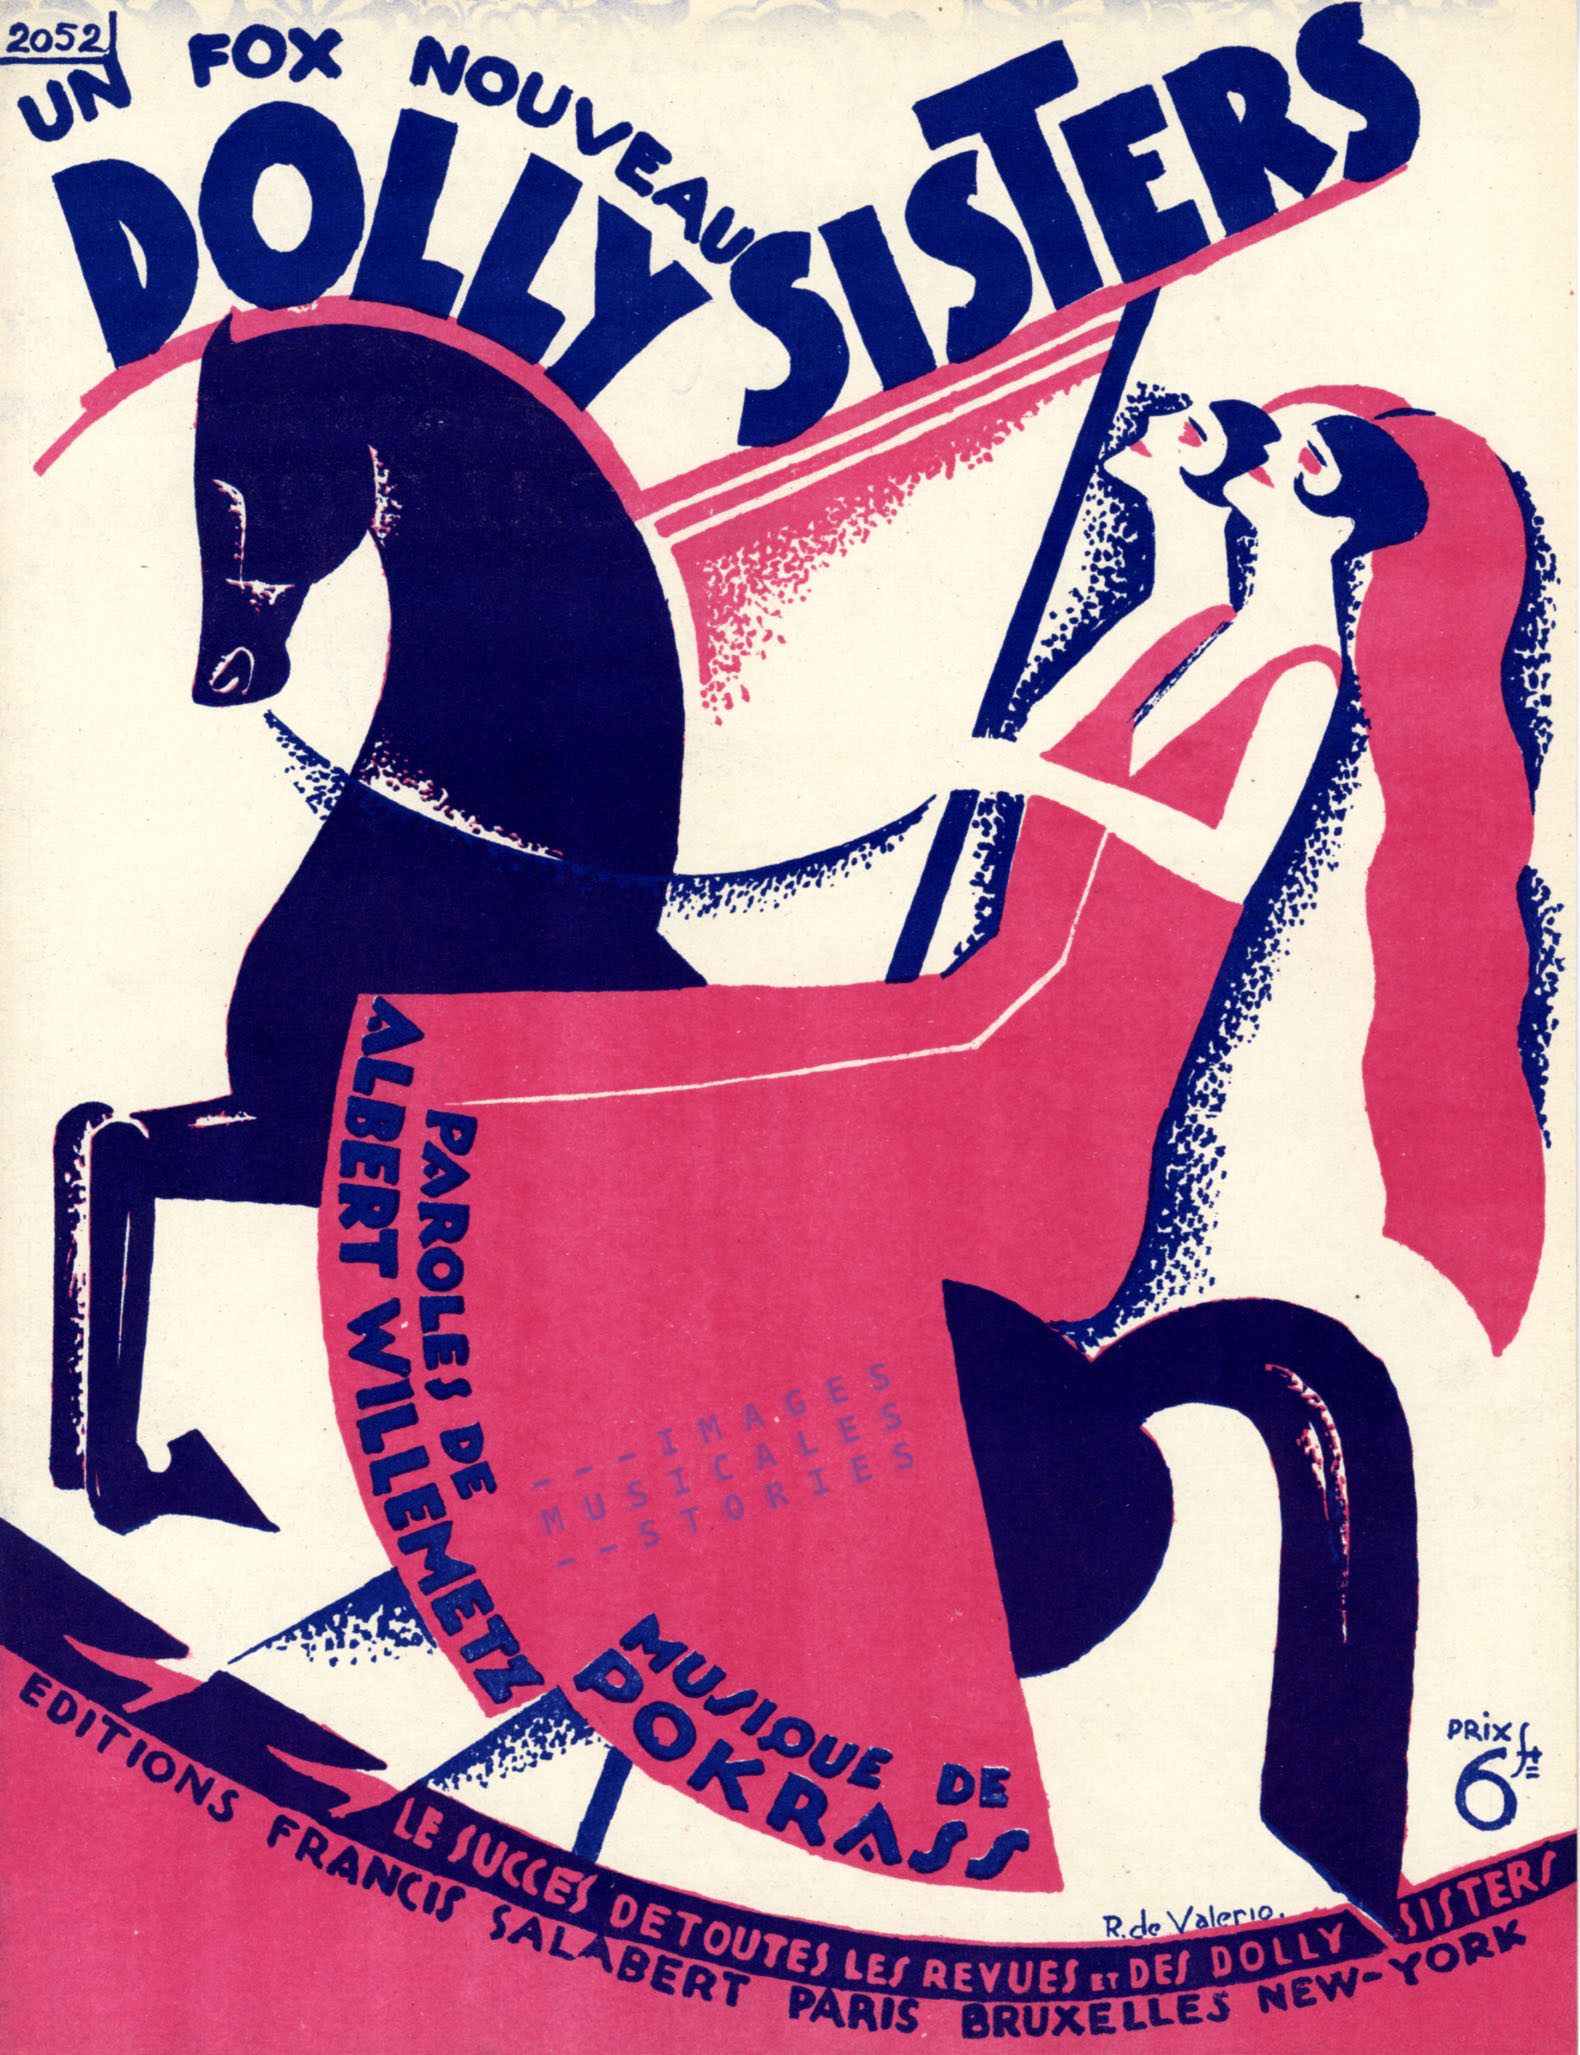 Dolly Sisters, illustrated by de Valerio